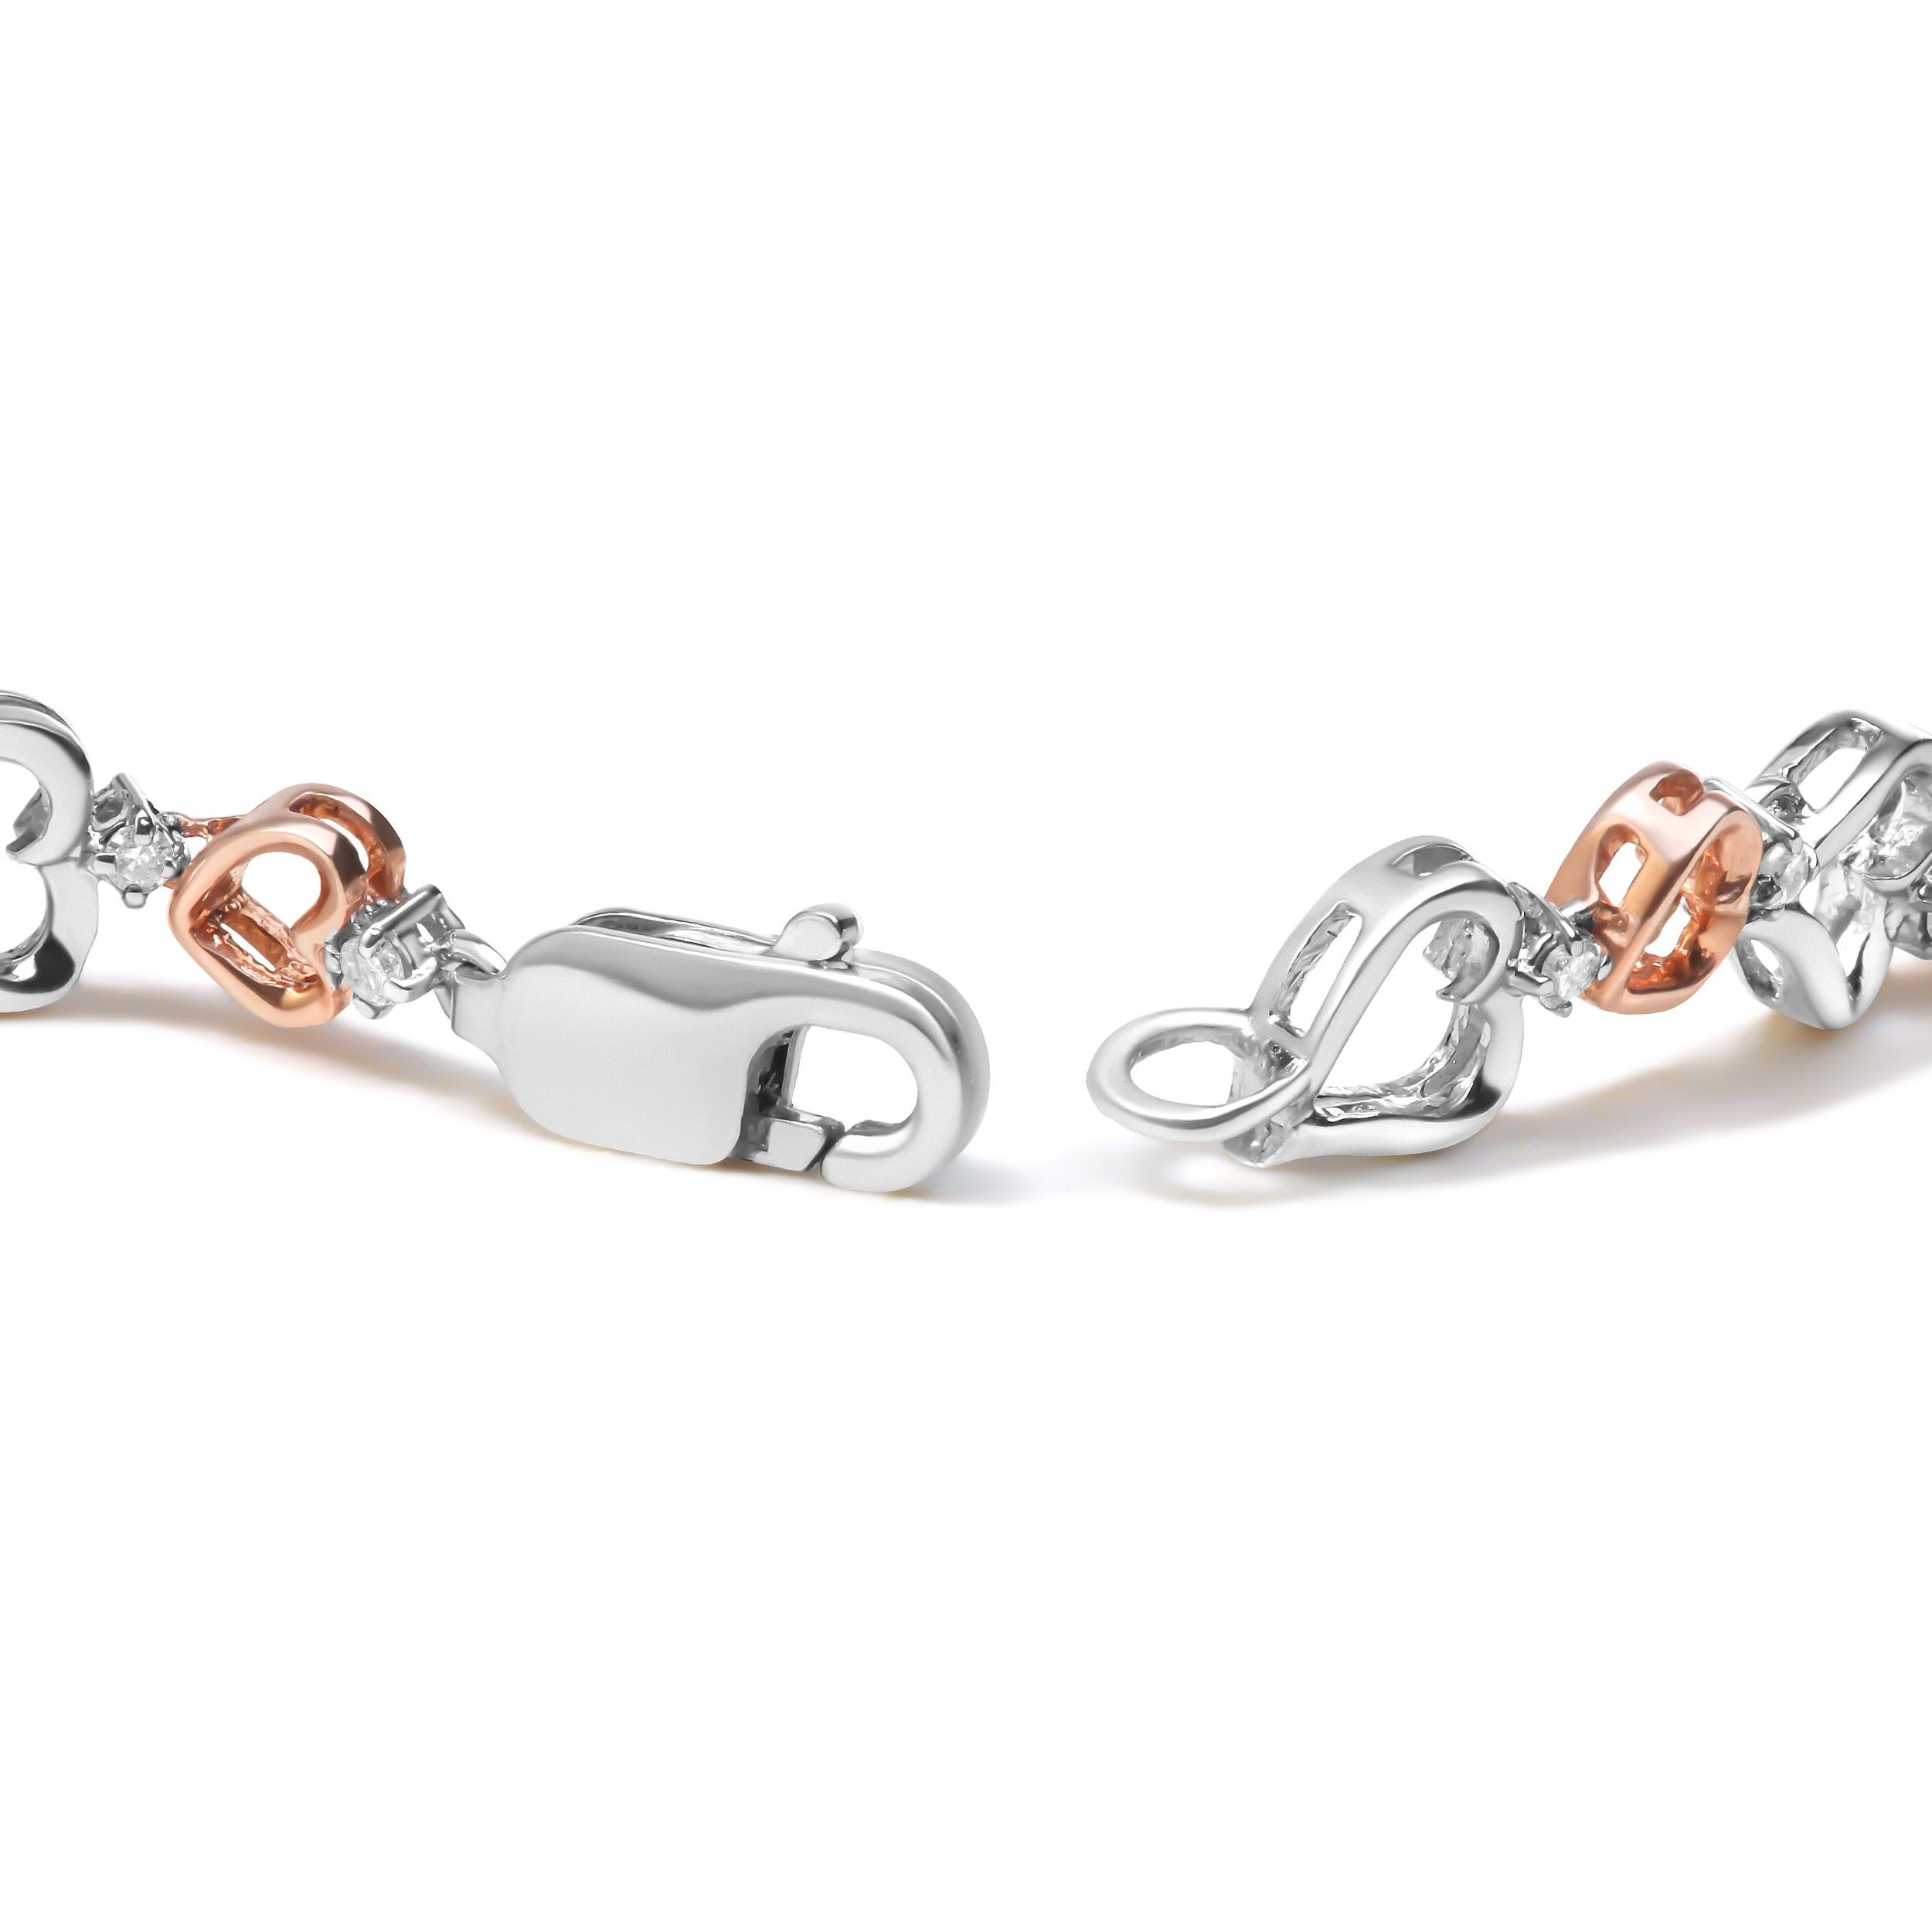 Introducing a stunning and romantic piece of jewelry, perfect for showing your love and affection. This beautiful 14K rose gold plated sterling silver heart link bracelet features 28 natural round cut diamonds, totaling 1/4 carats of radiant